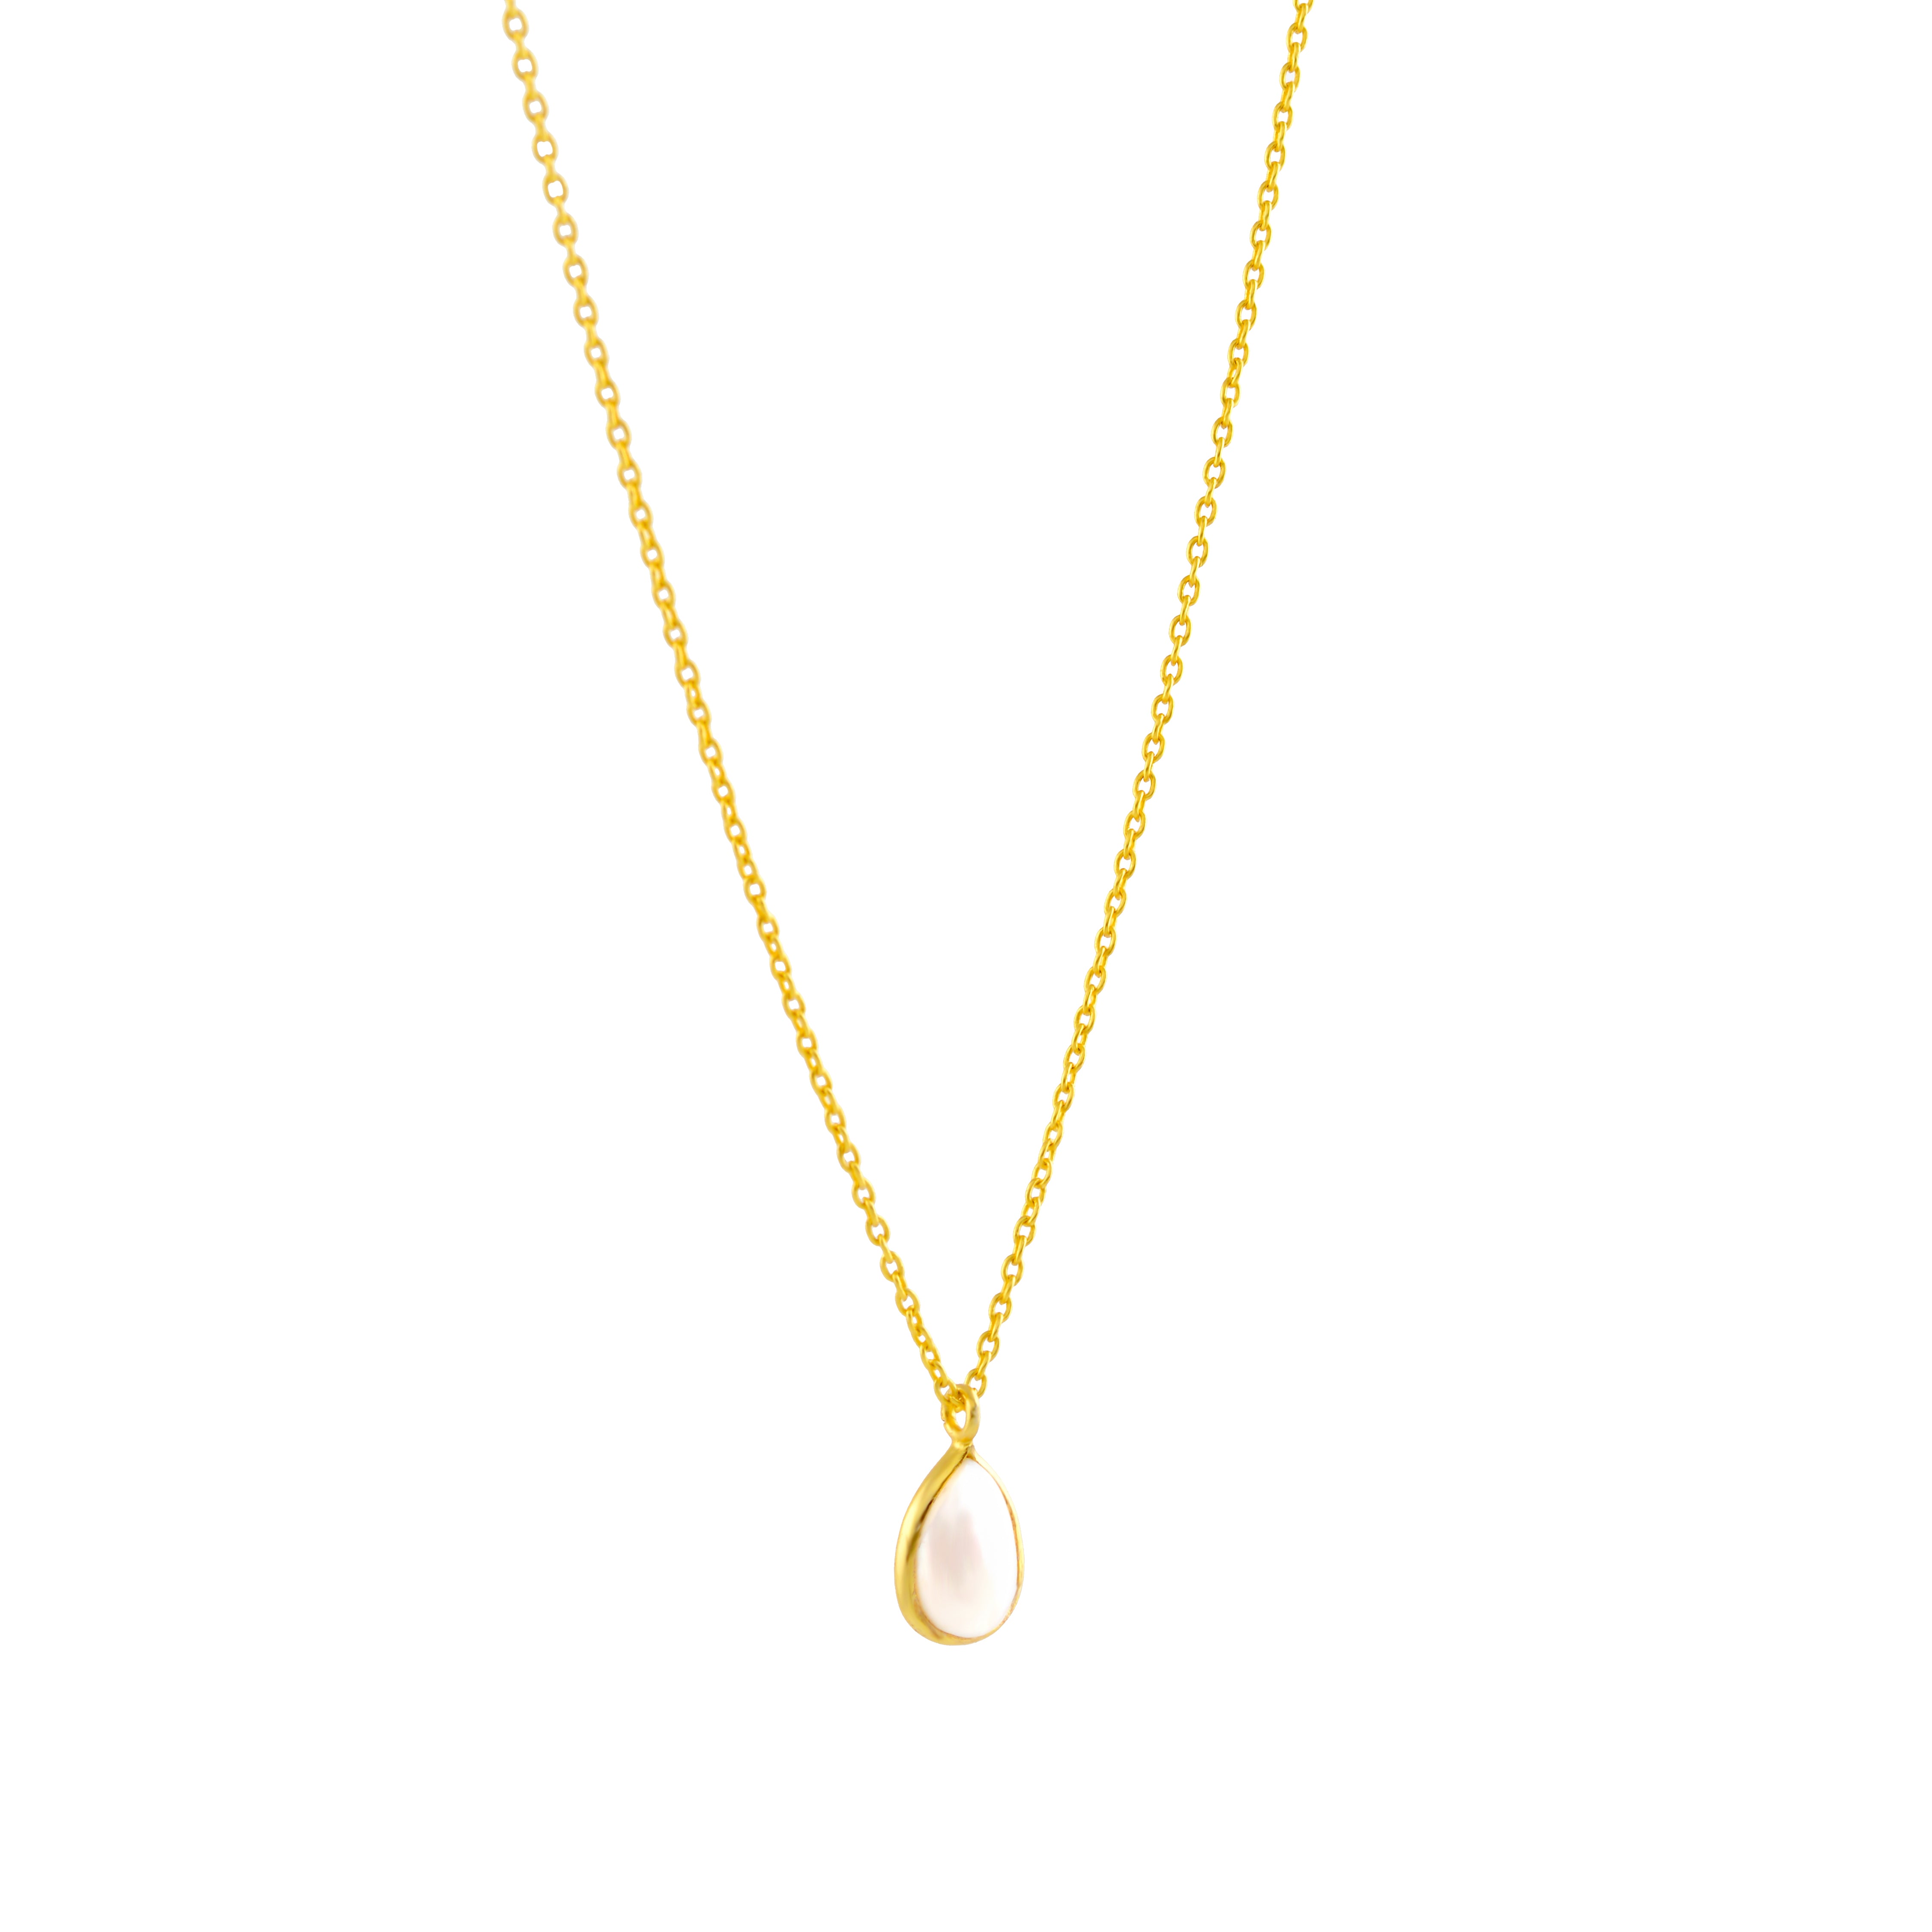 Modern Silver Fresh Water Pearl Pendant Necklace with a Gold Coating